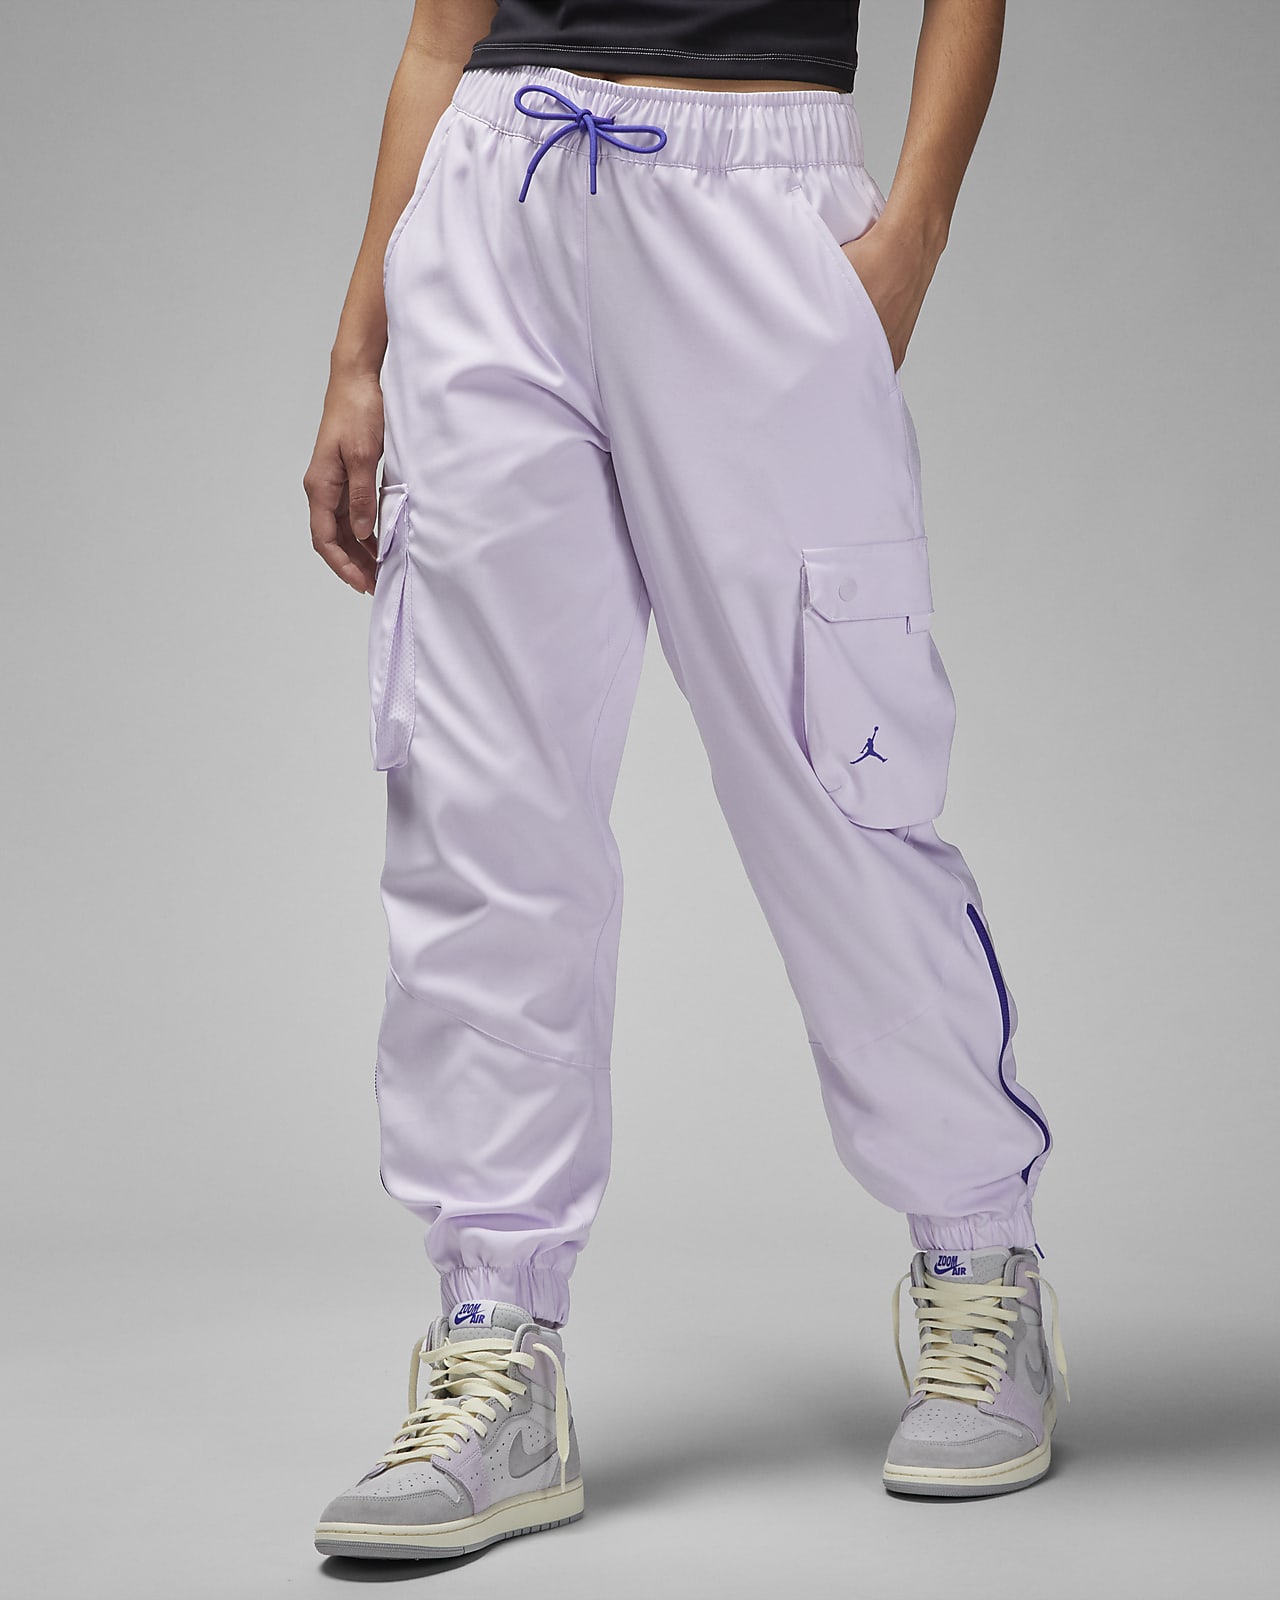 Nike Therma-FIT Essential Women's Running Trousers. Nike IL